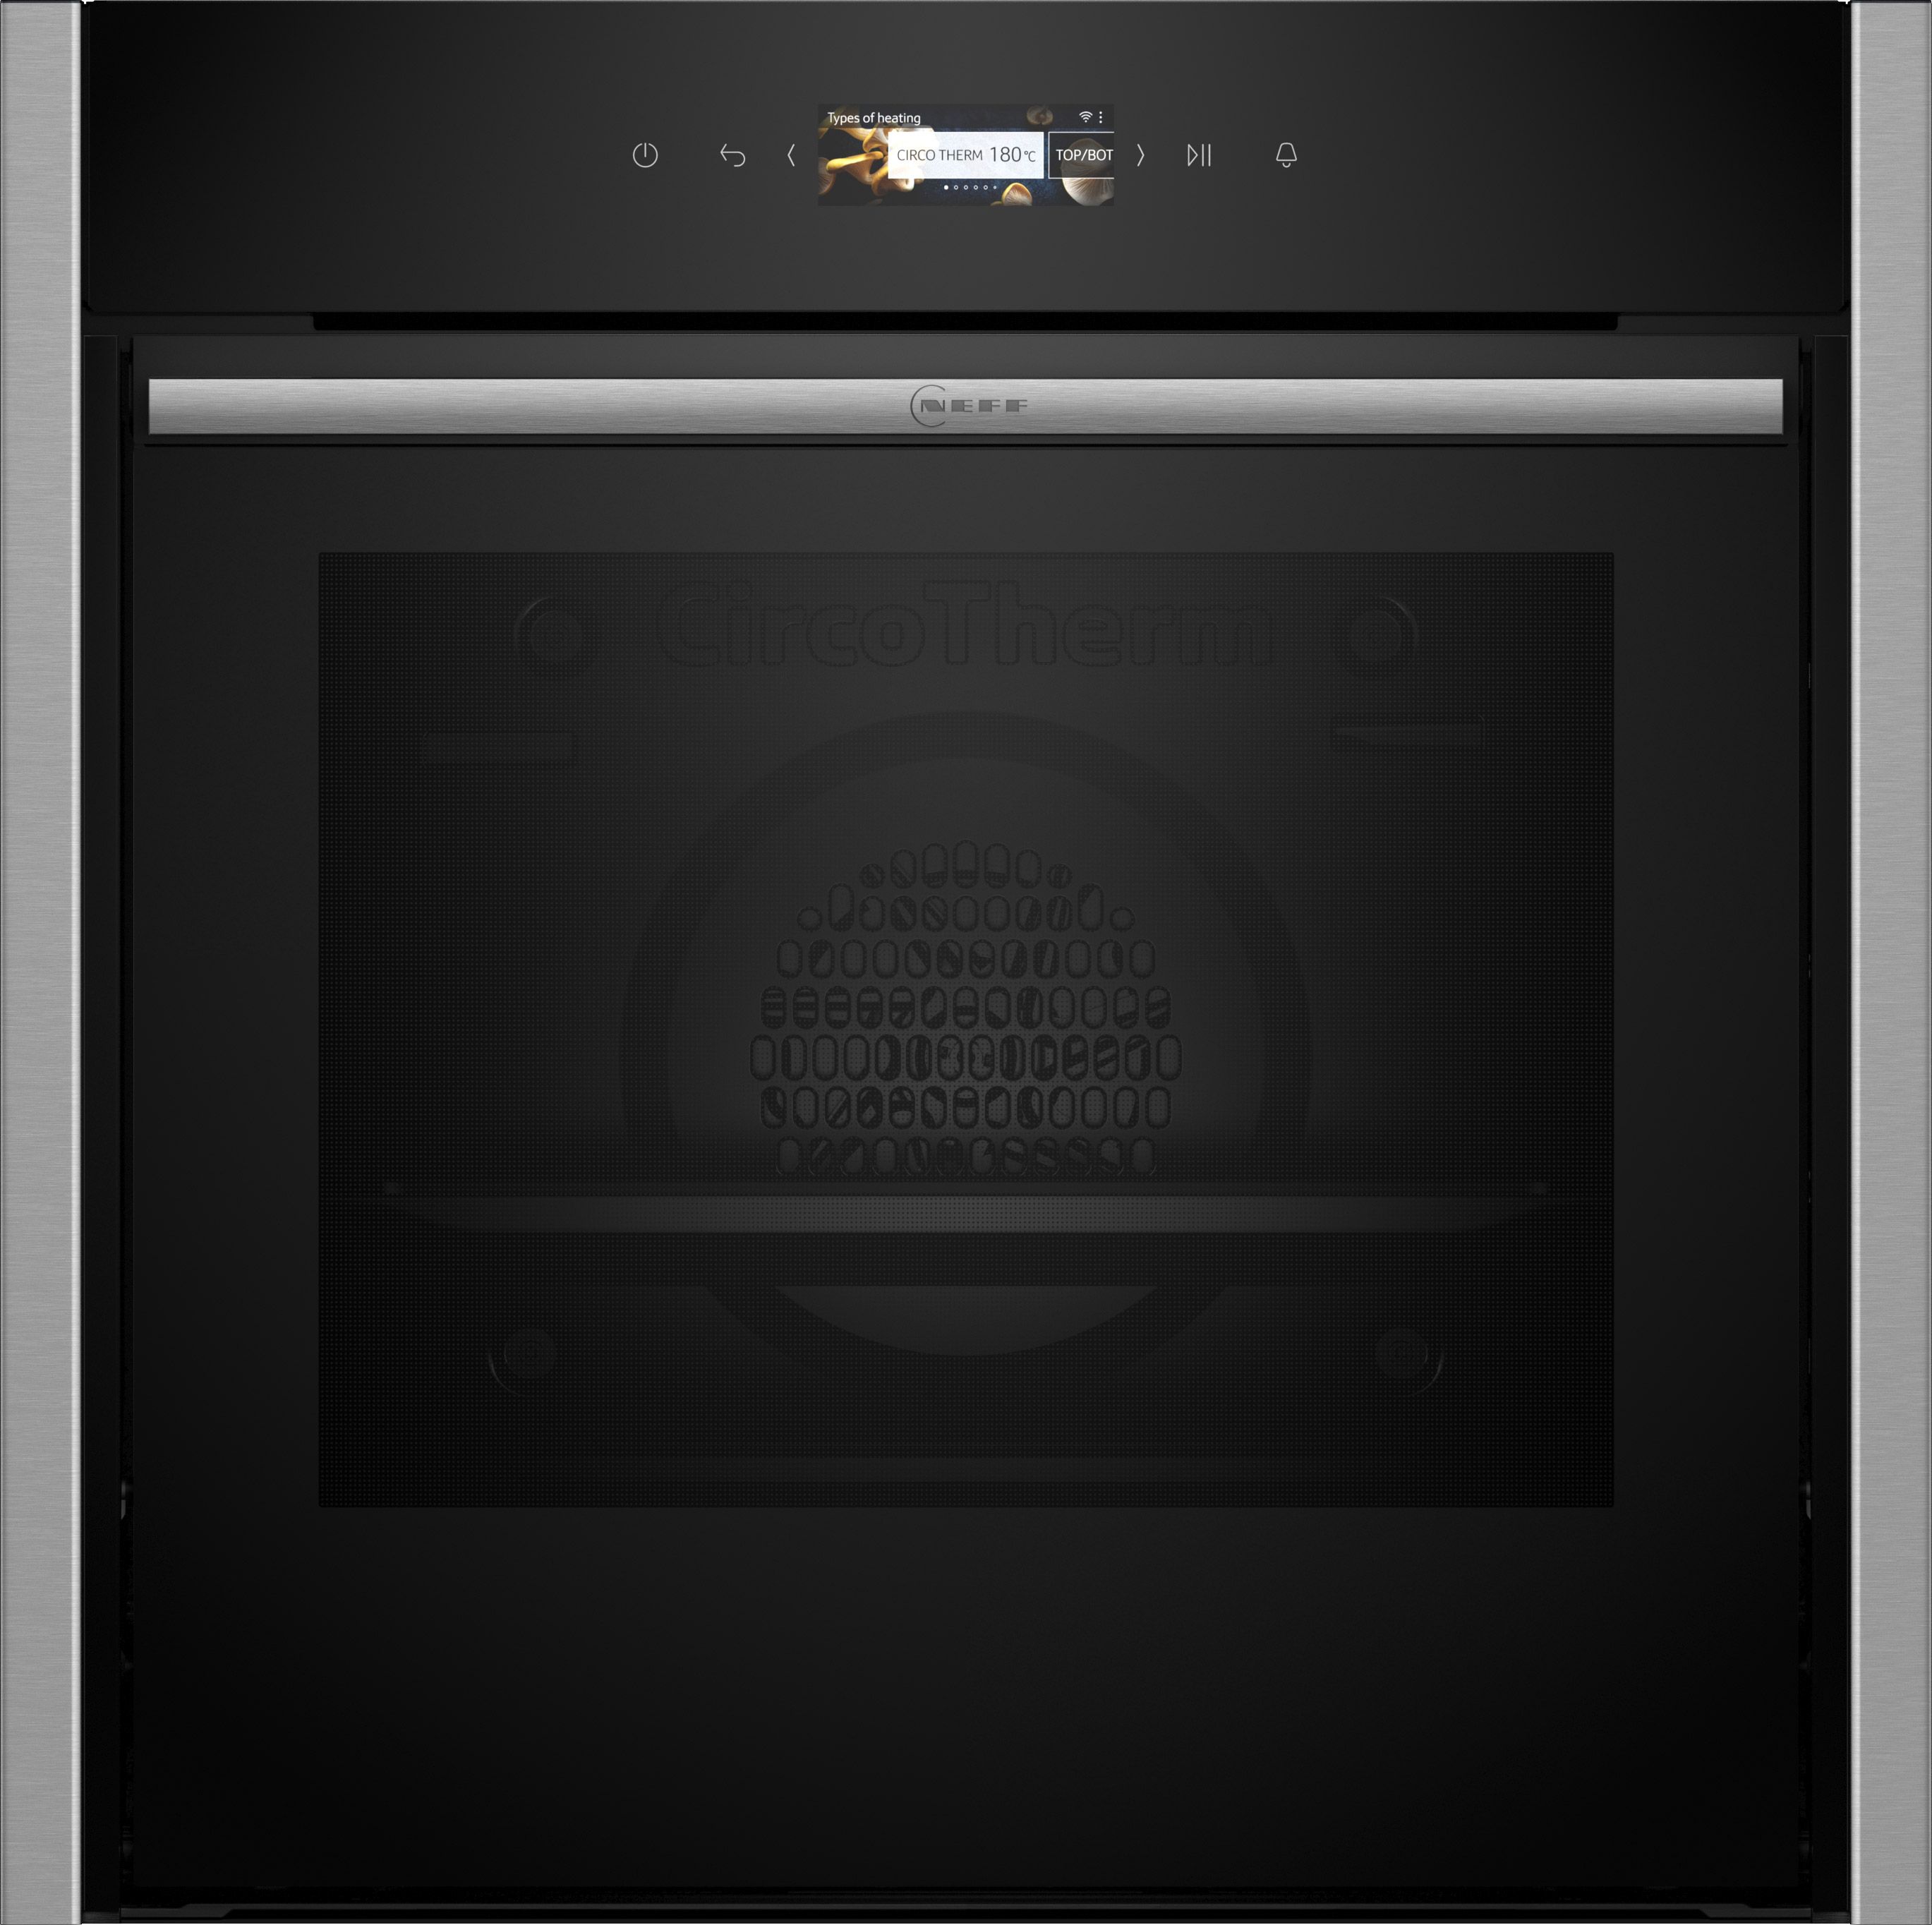 NEFF N70 Slide&Hide B54CR71N0B Built In Electric Single Oven with Pyrolytic Cleaning - Stainless Steel - A+ Rated, Stainless Steel